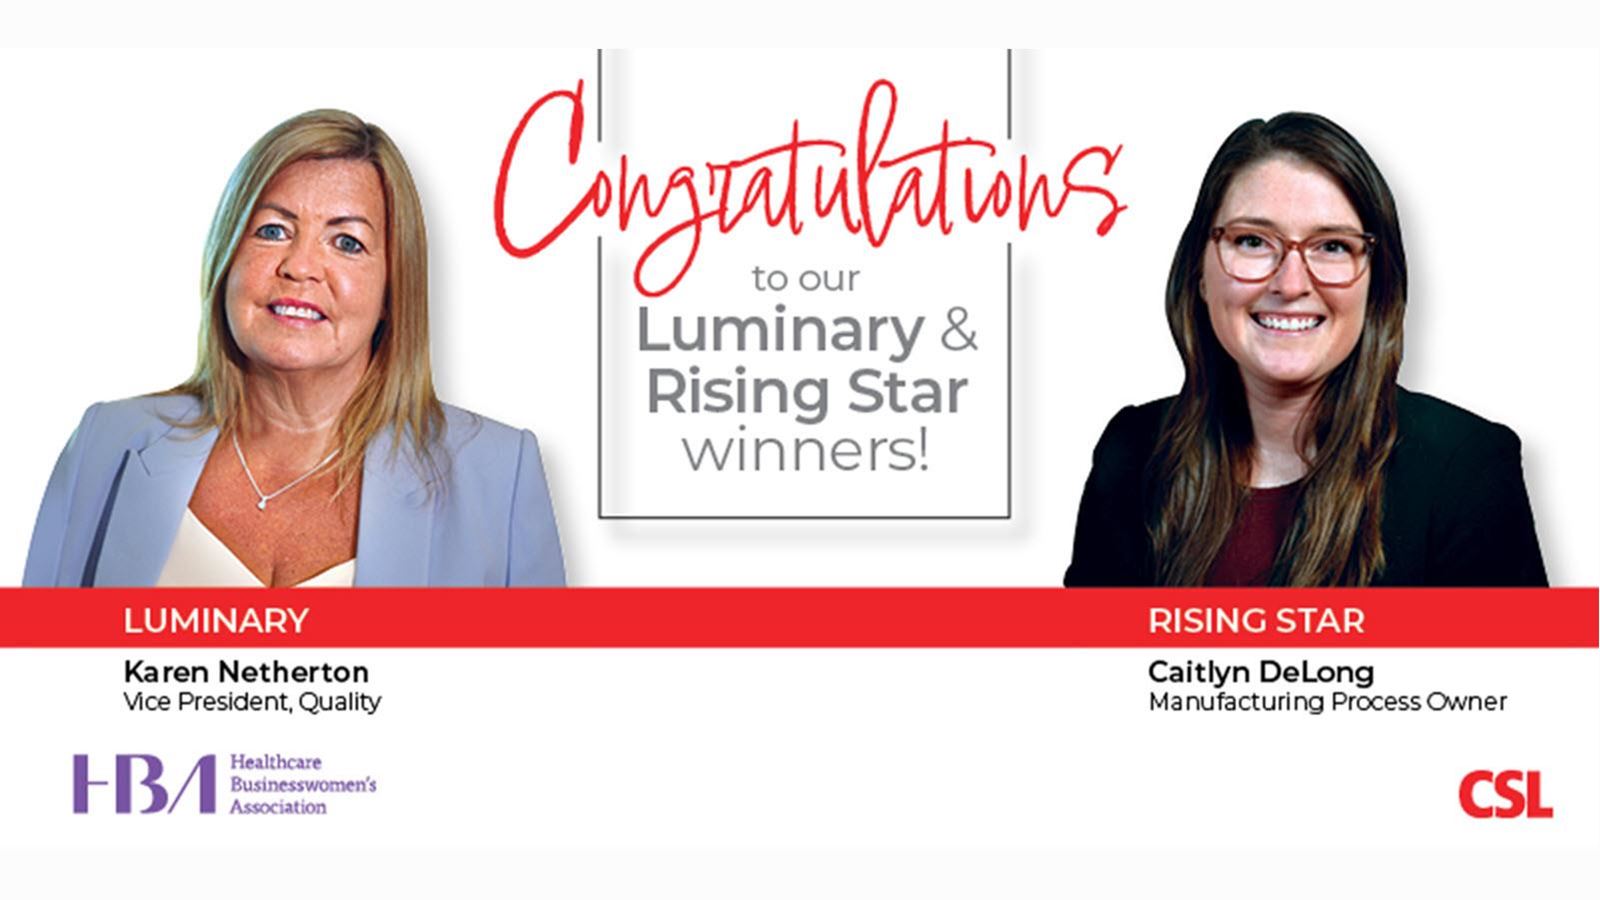 Karen Netherton and Caitlyn DeLong are honored by the Healthcare Businesswomen's Association